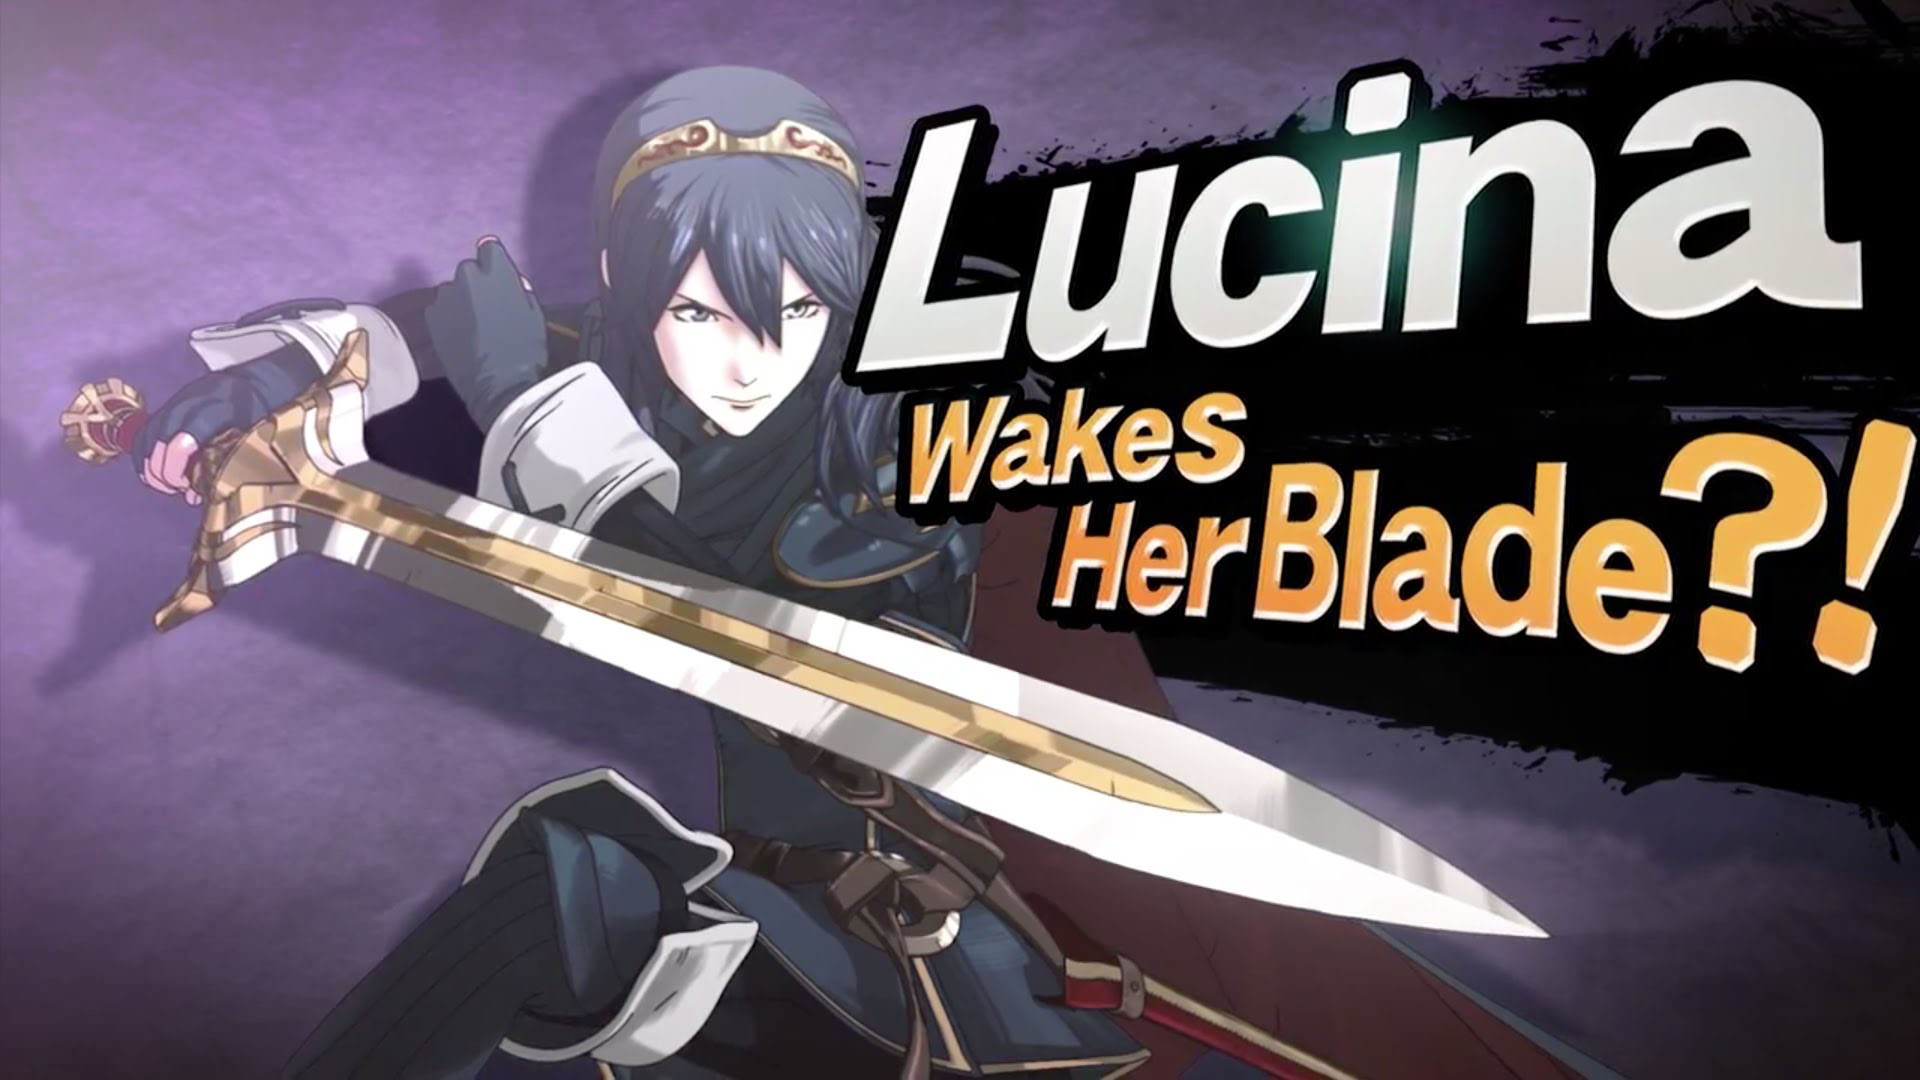 Lucina from Fire Emblem and Super Smash Bros1920 x 1080